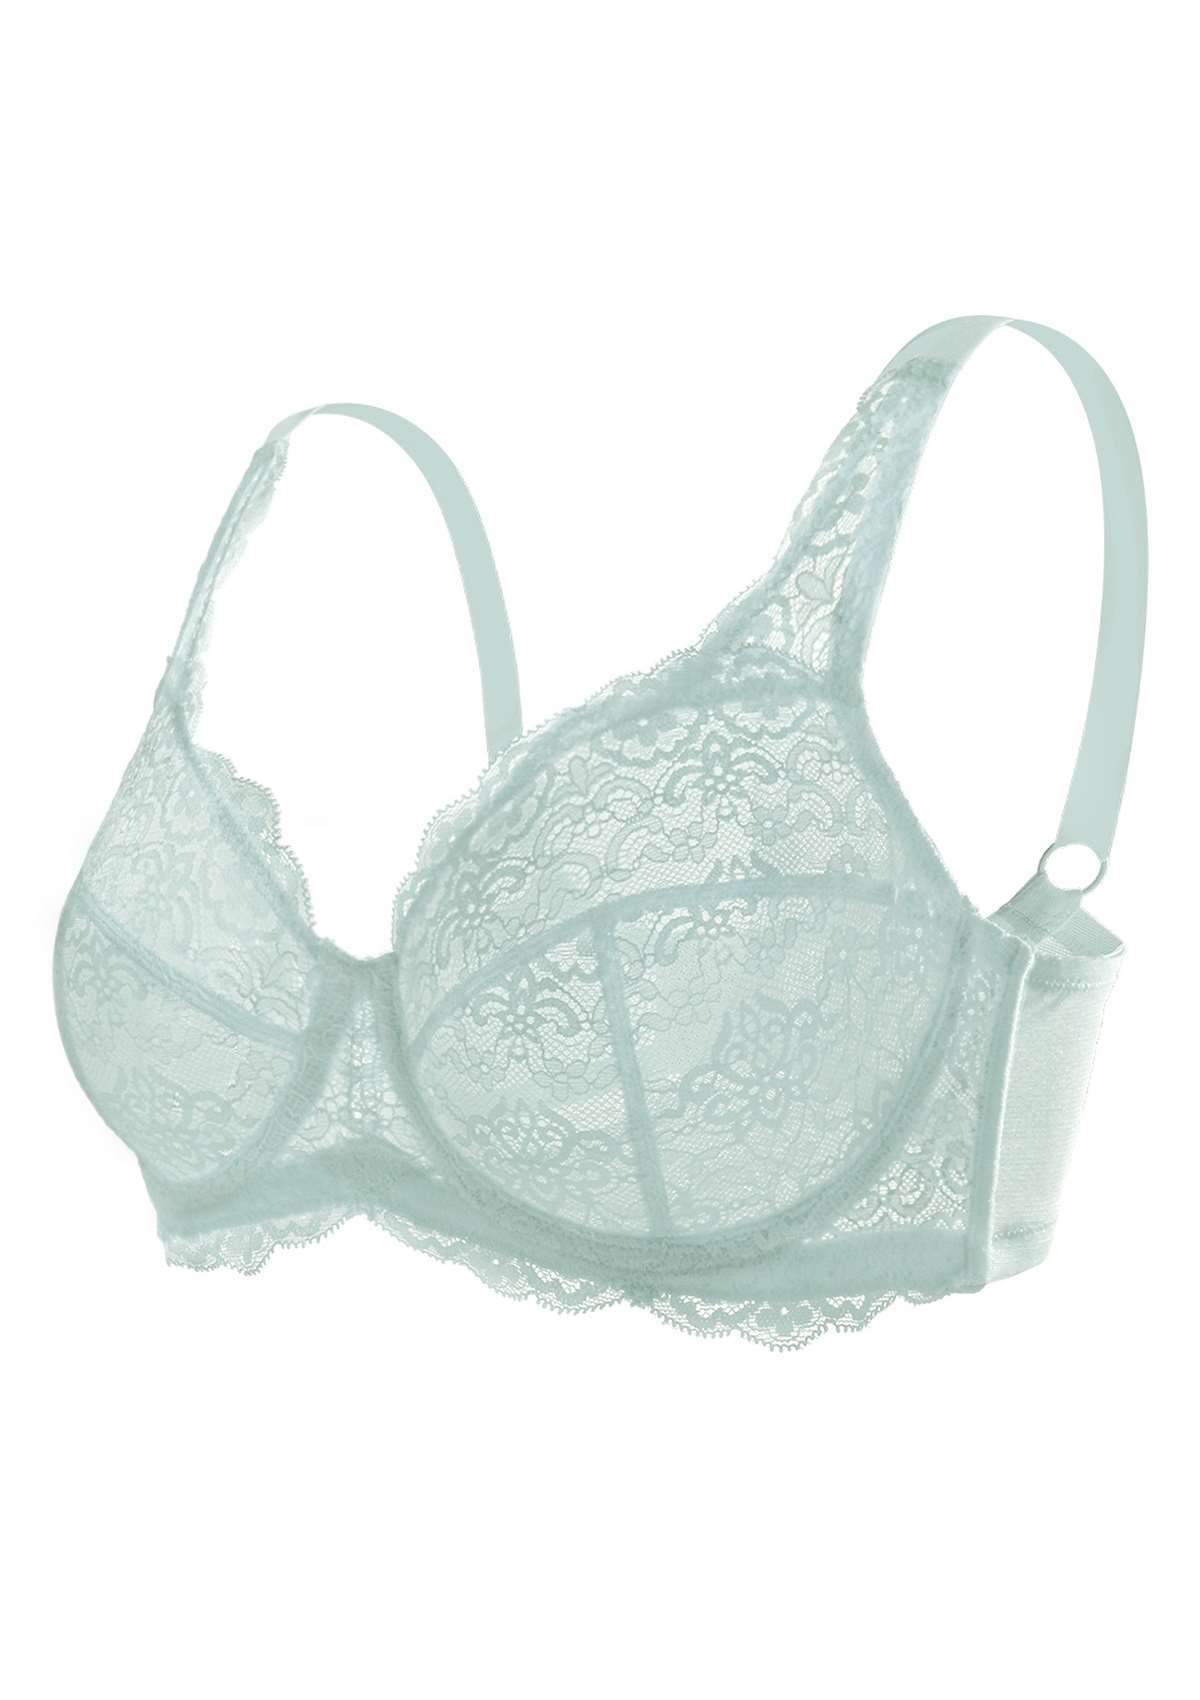 HSIA All-Over Floral Lace: Best Bra For Elderly With Sagging Breasts - Crystal Blue / 40 / C